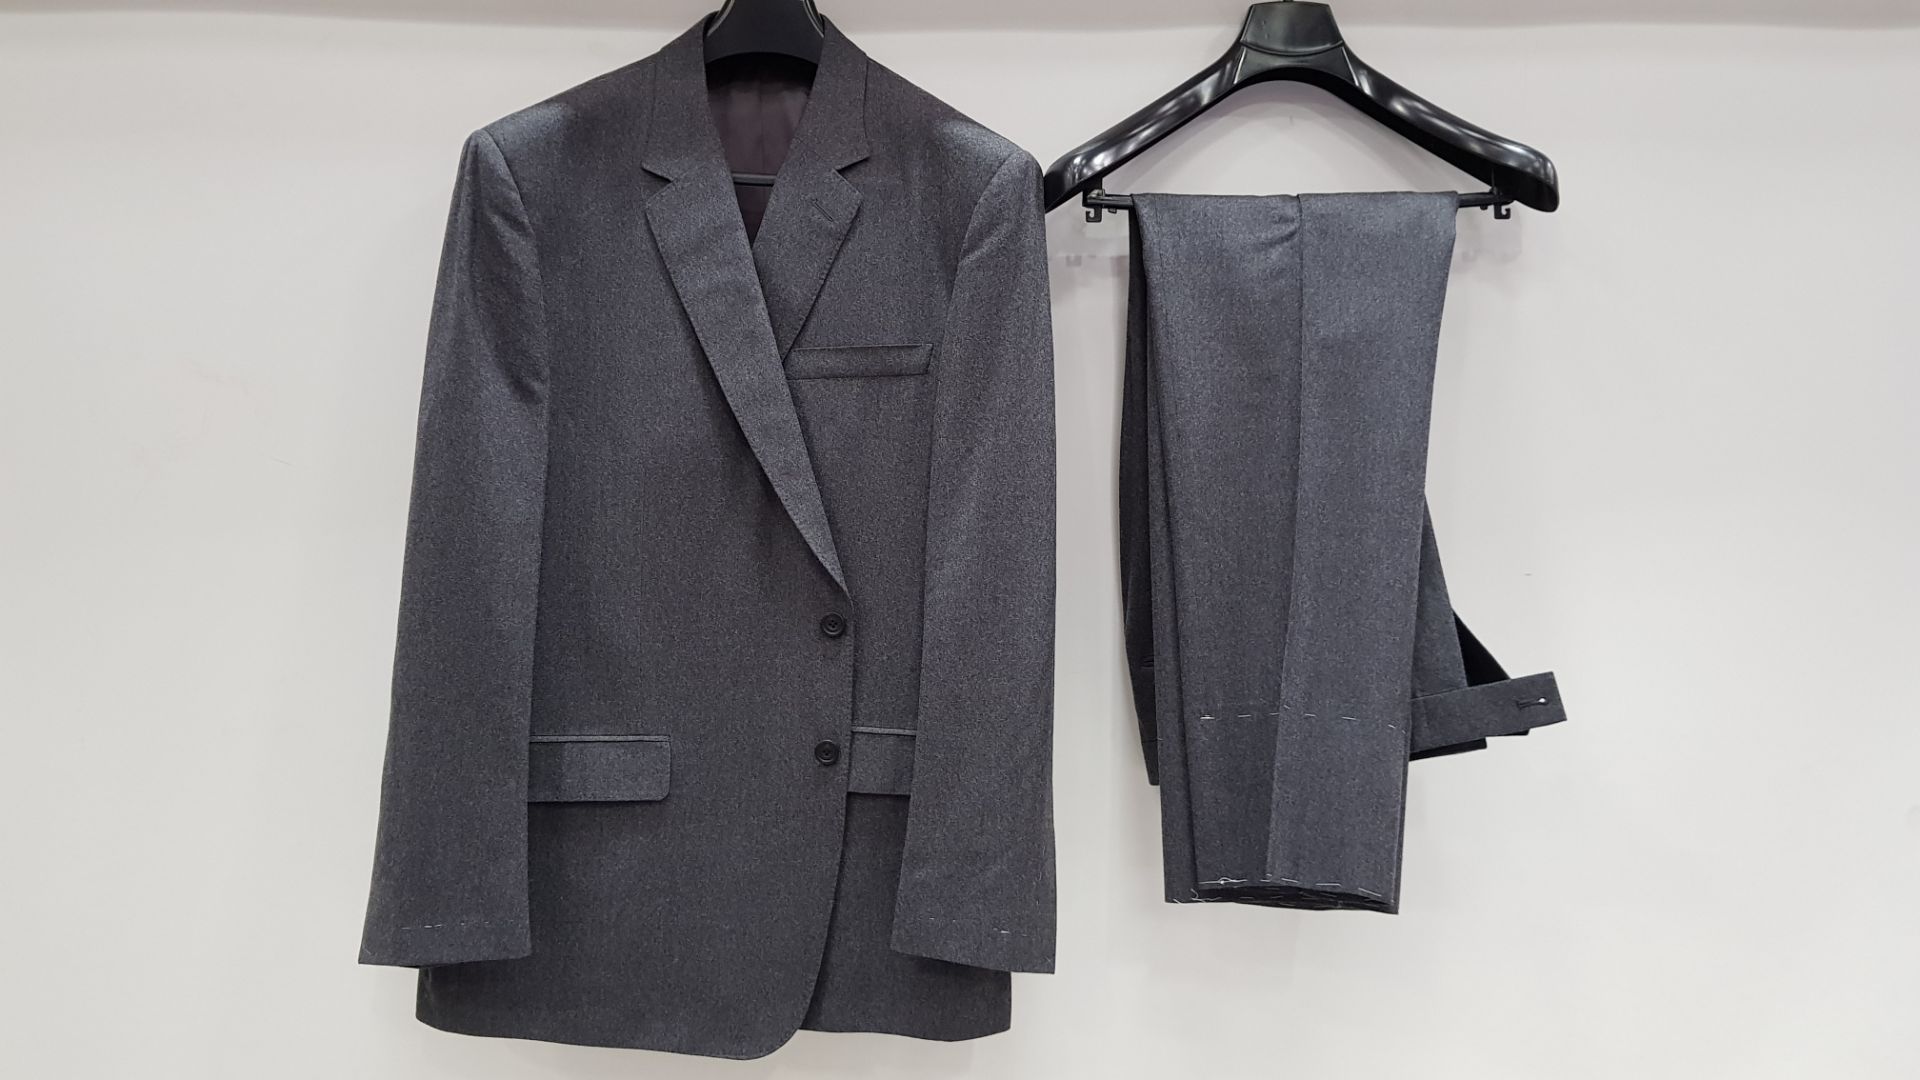 3 X BRAND NEW LUTWYCHE HAND TAILORED GREY PLAIN SUITS SIZE 42R, 44R AND 40L (PLEASE NOTE SUITS ARE